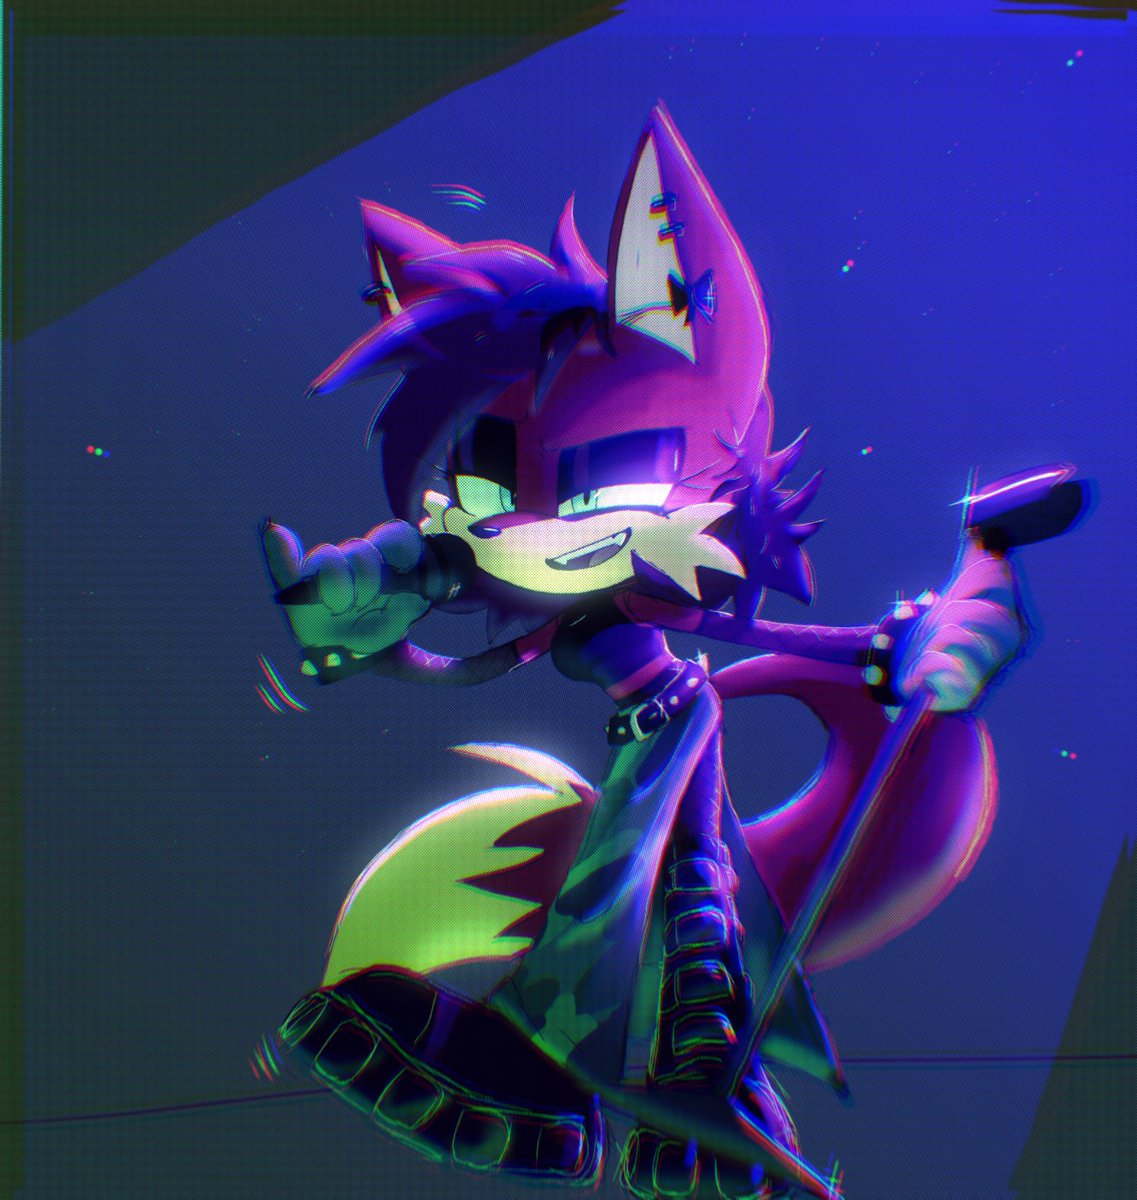 Drew fanart of @PixieFeatherKw3 ‘s Fiona Fox from her Rock band au!!!

(Pls check them out their art is AMAZING!!!)
#Sonic #SonicTheHedegehog #FionaFox